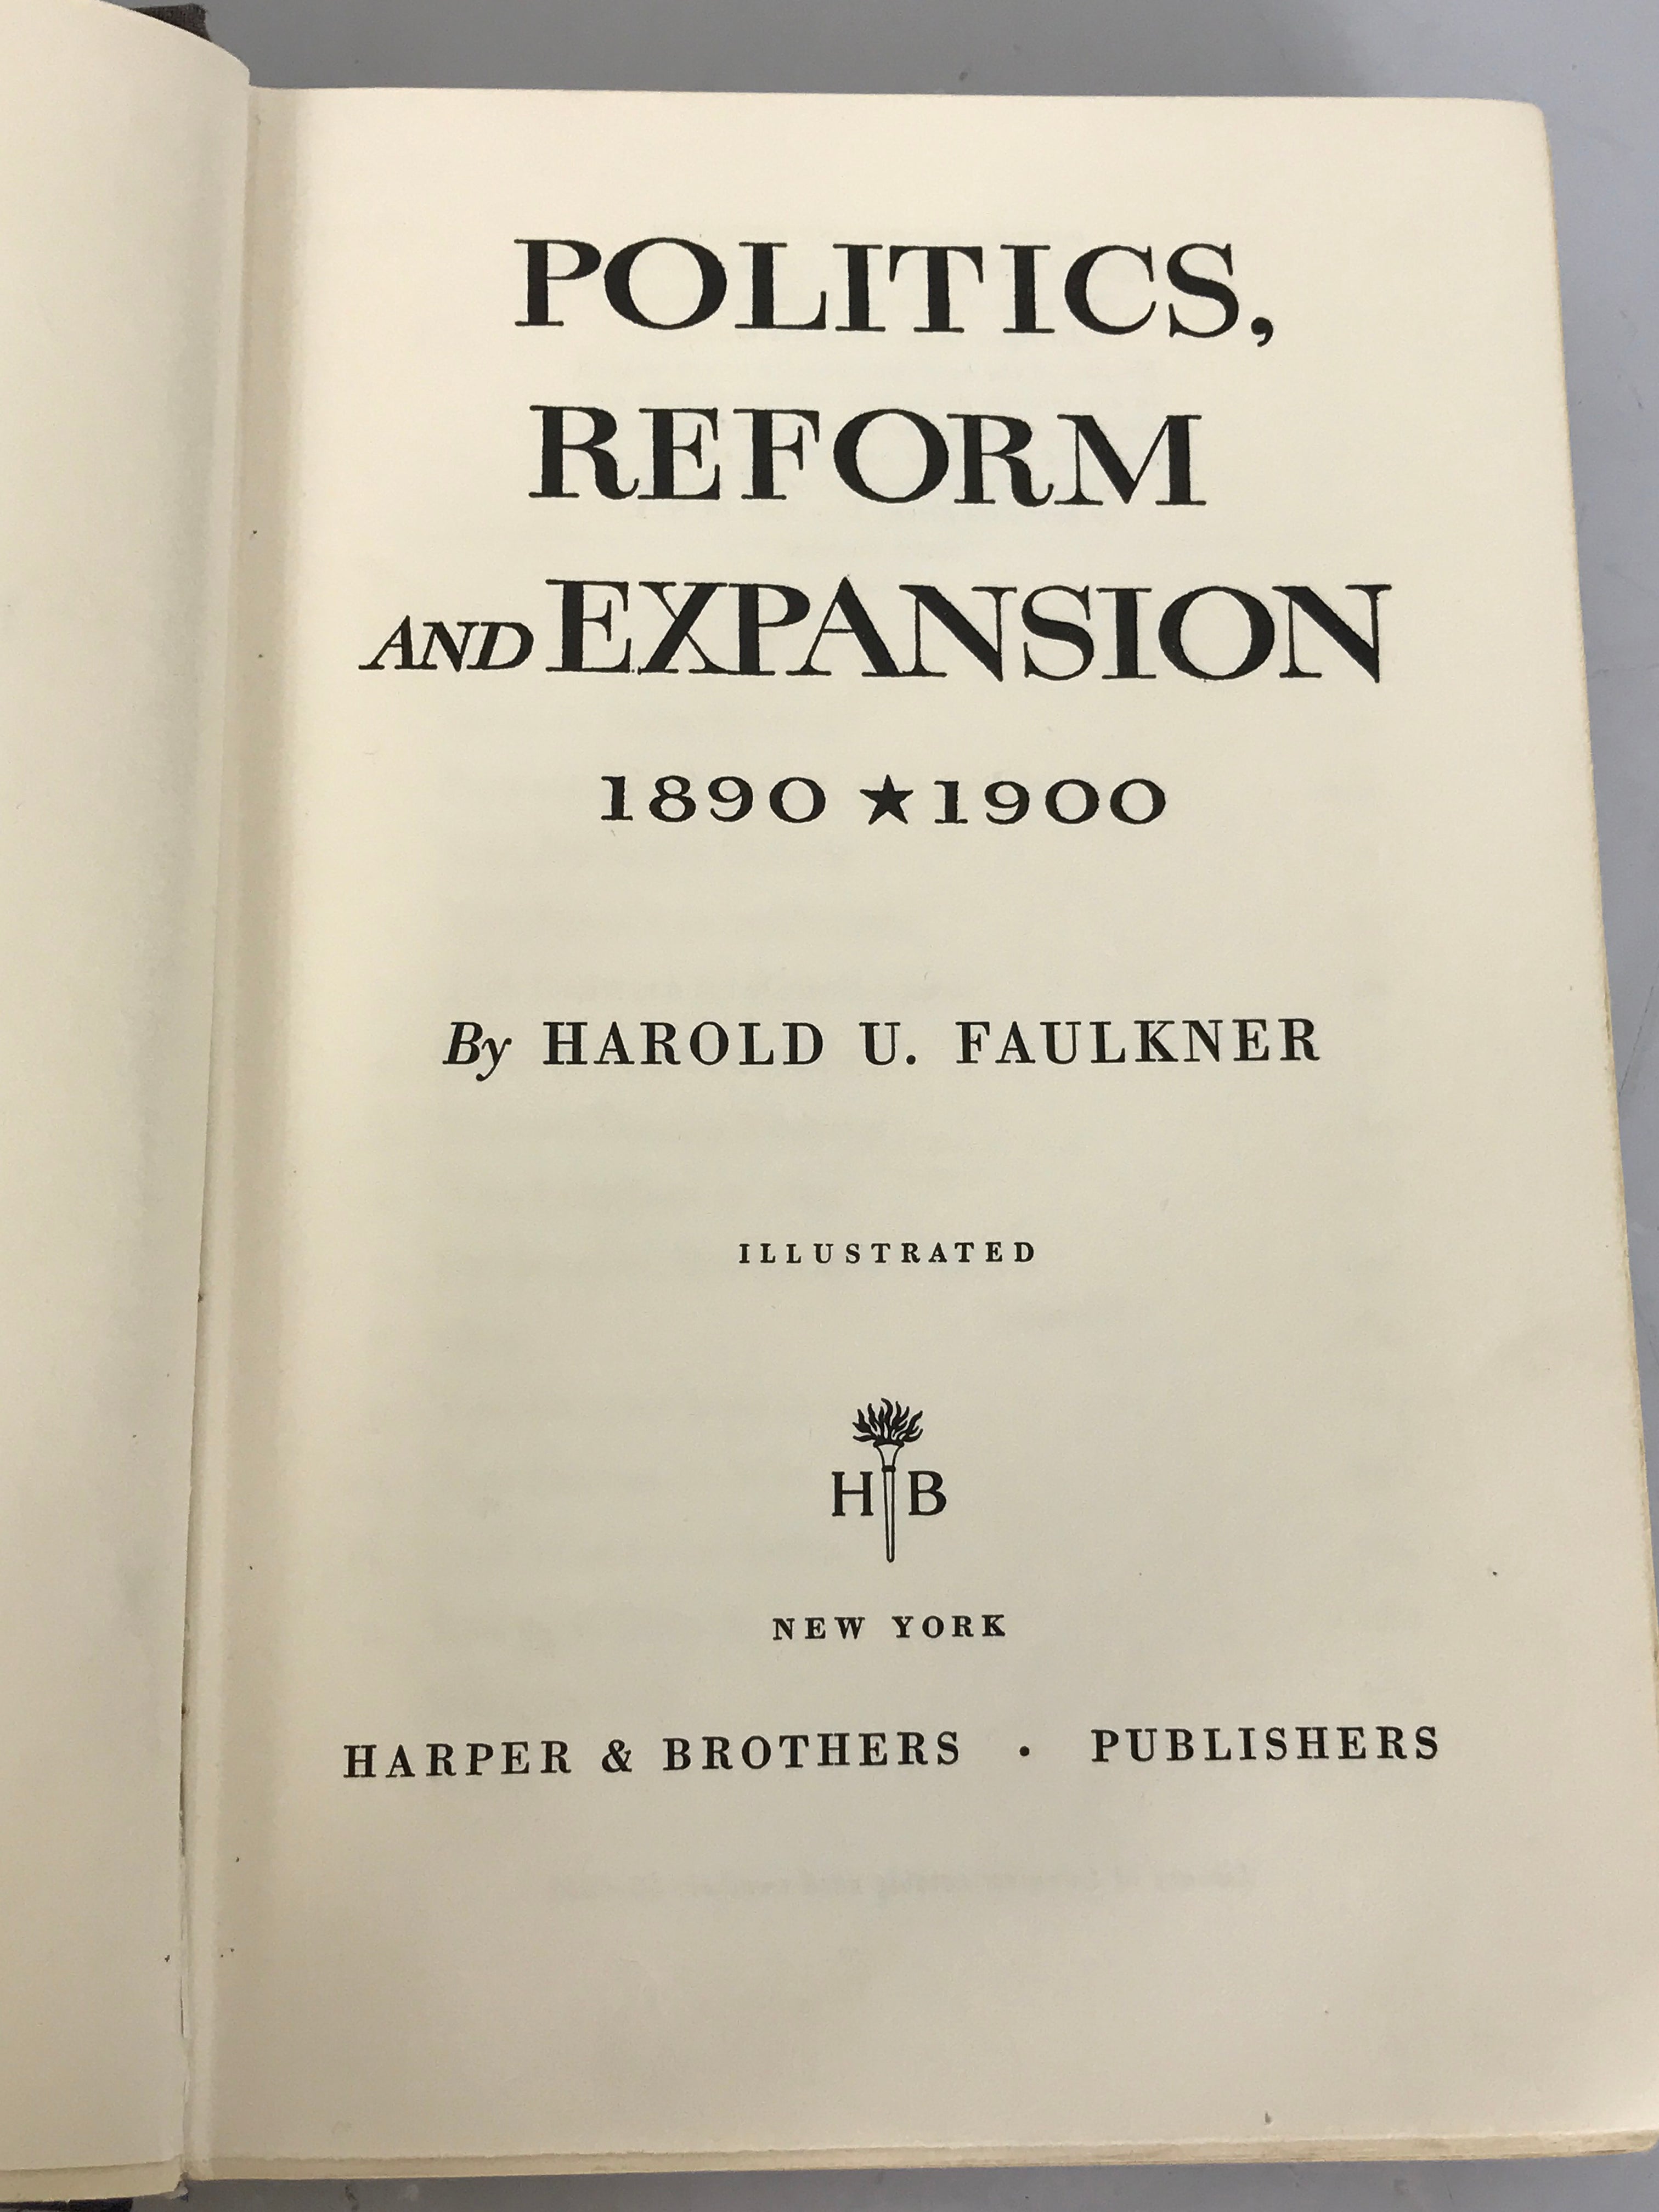 Politics, Reform and Expansion 1890*1900 by Harold U. Faulkner (1959) First Edition HC